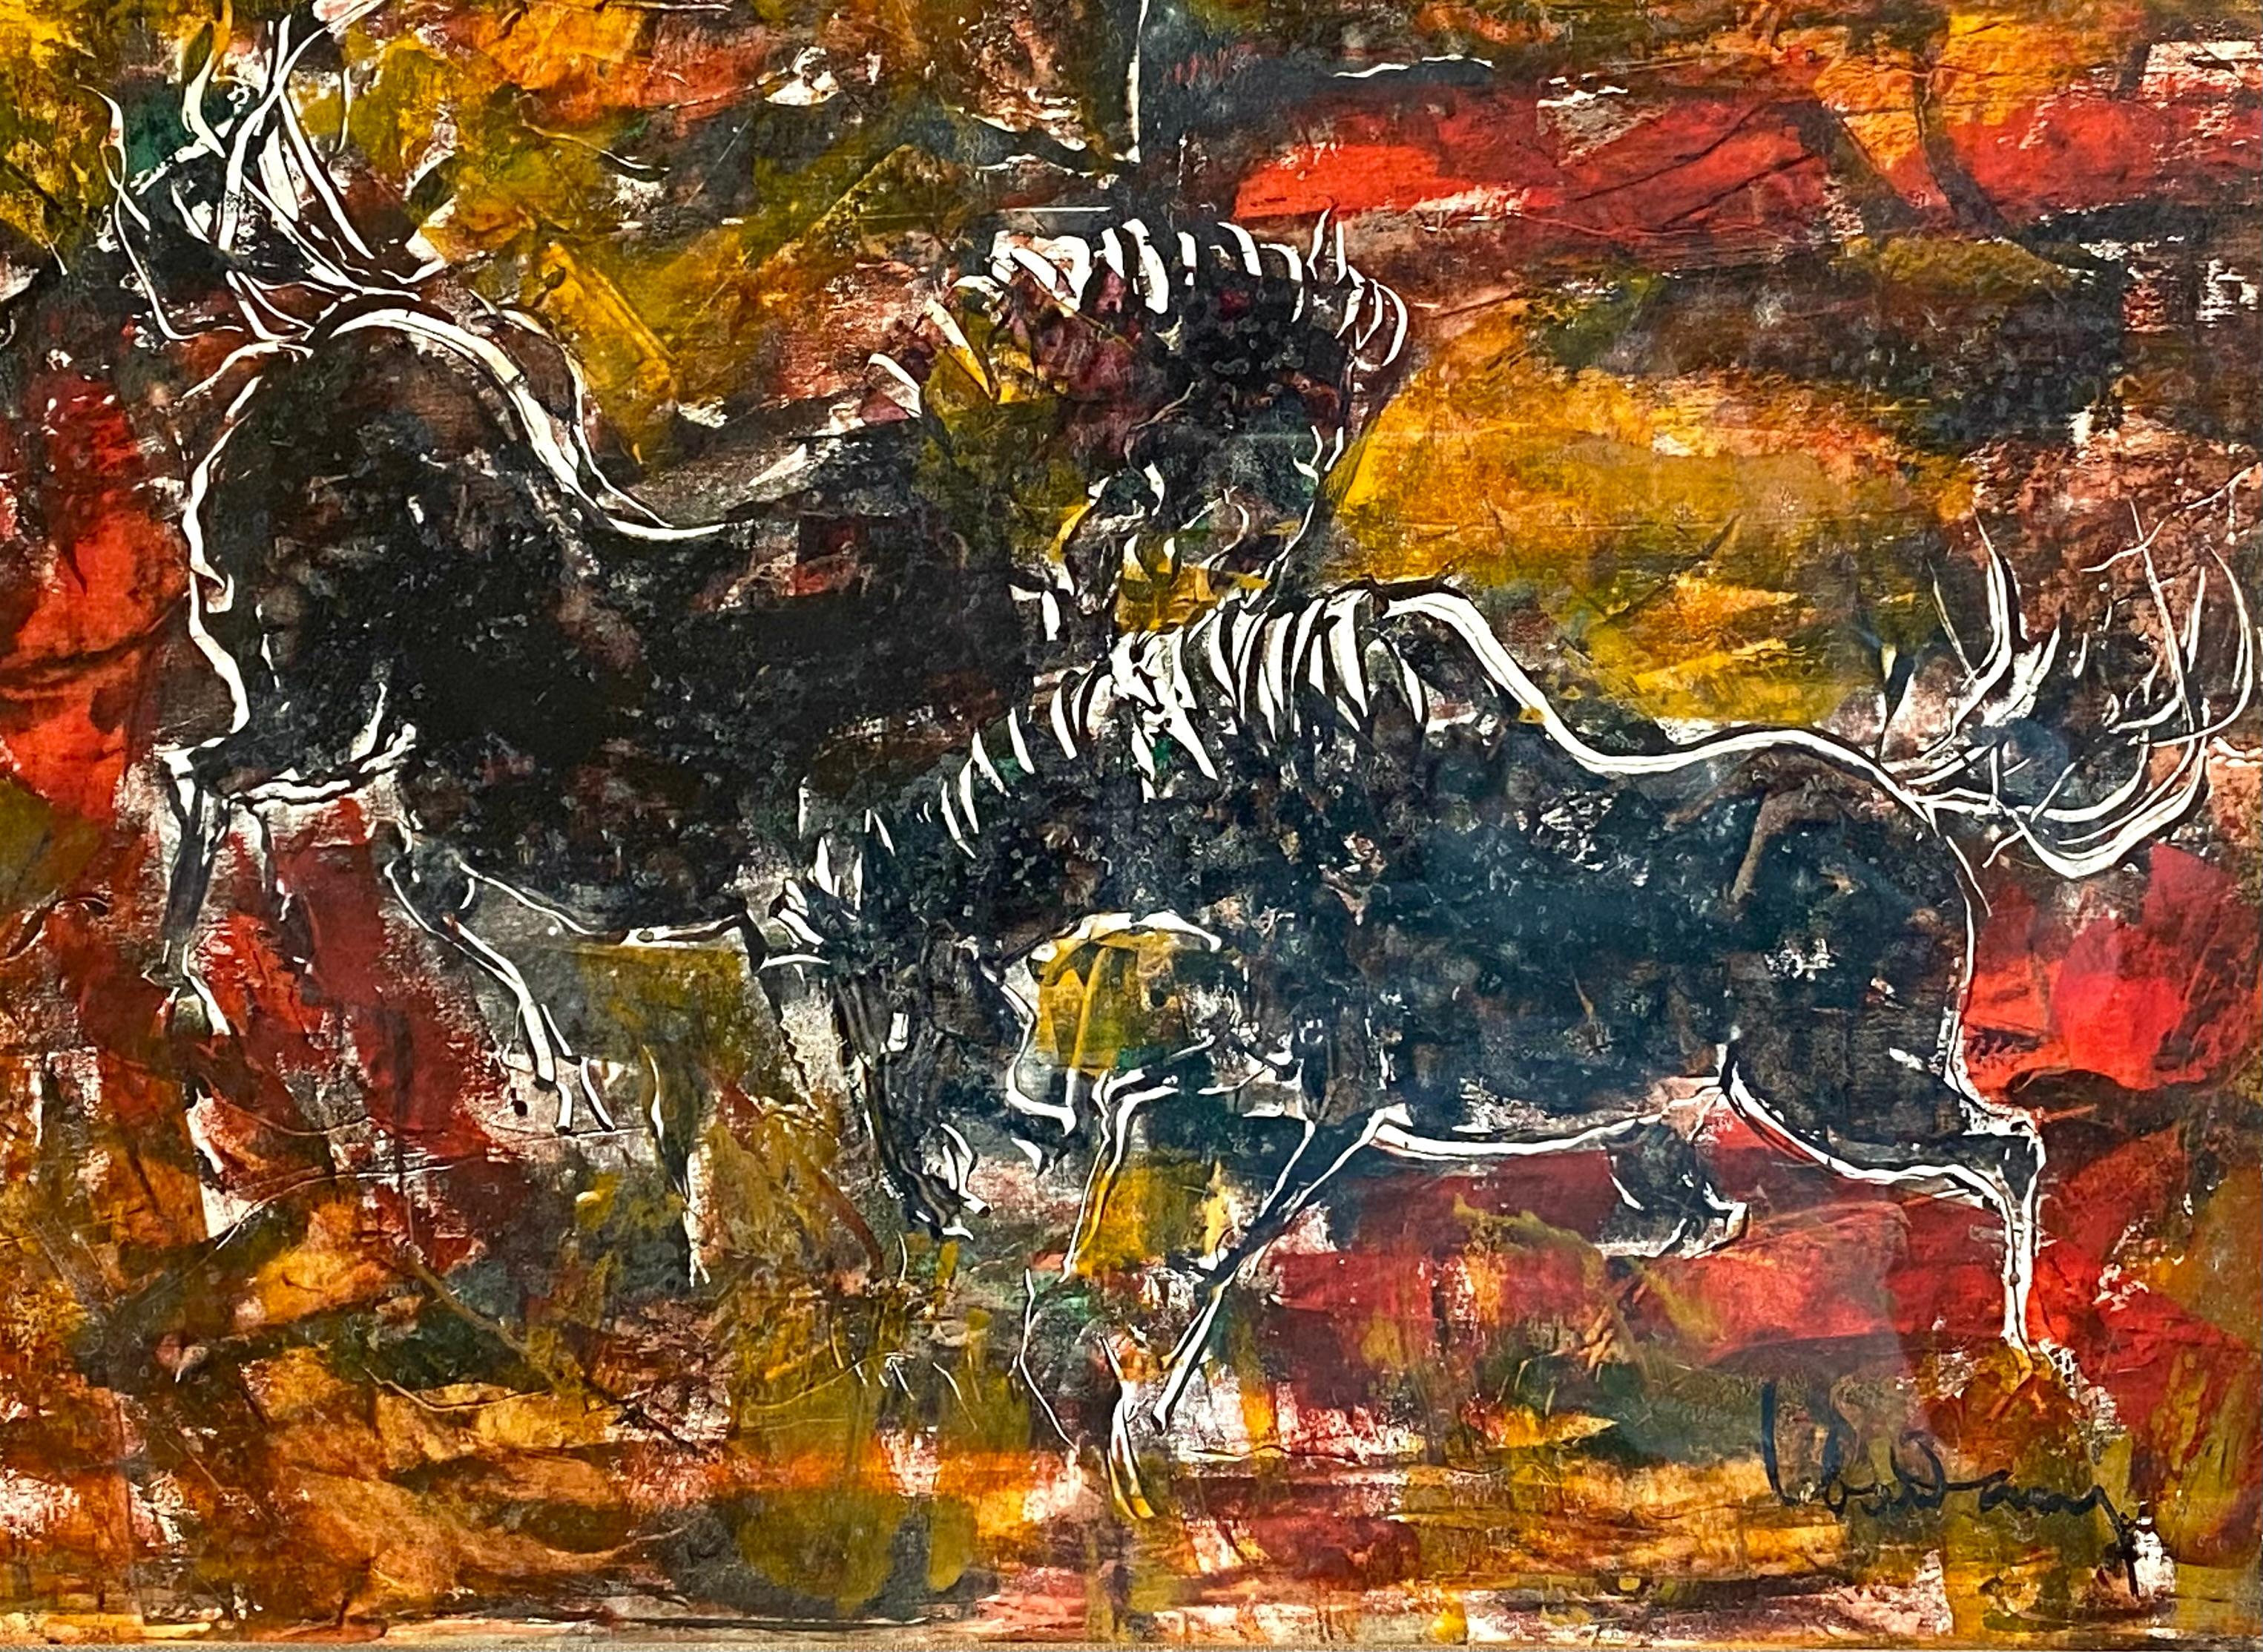 Original oil painting on archival paper by the renowned Vietnamese and French artist, Hoi Lebadang of two wild horses.  Signed lower right by the artist.  Condition is excellent. Circa 1960. The artwork is housed in its original Heydenryk washed